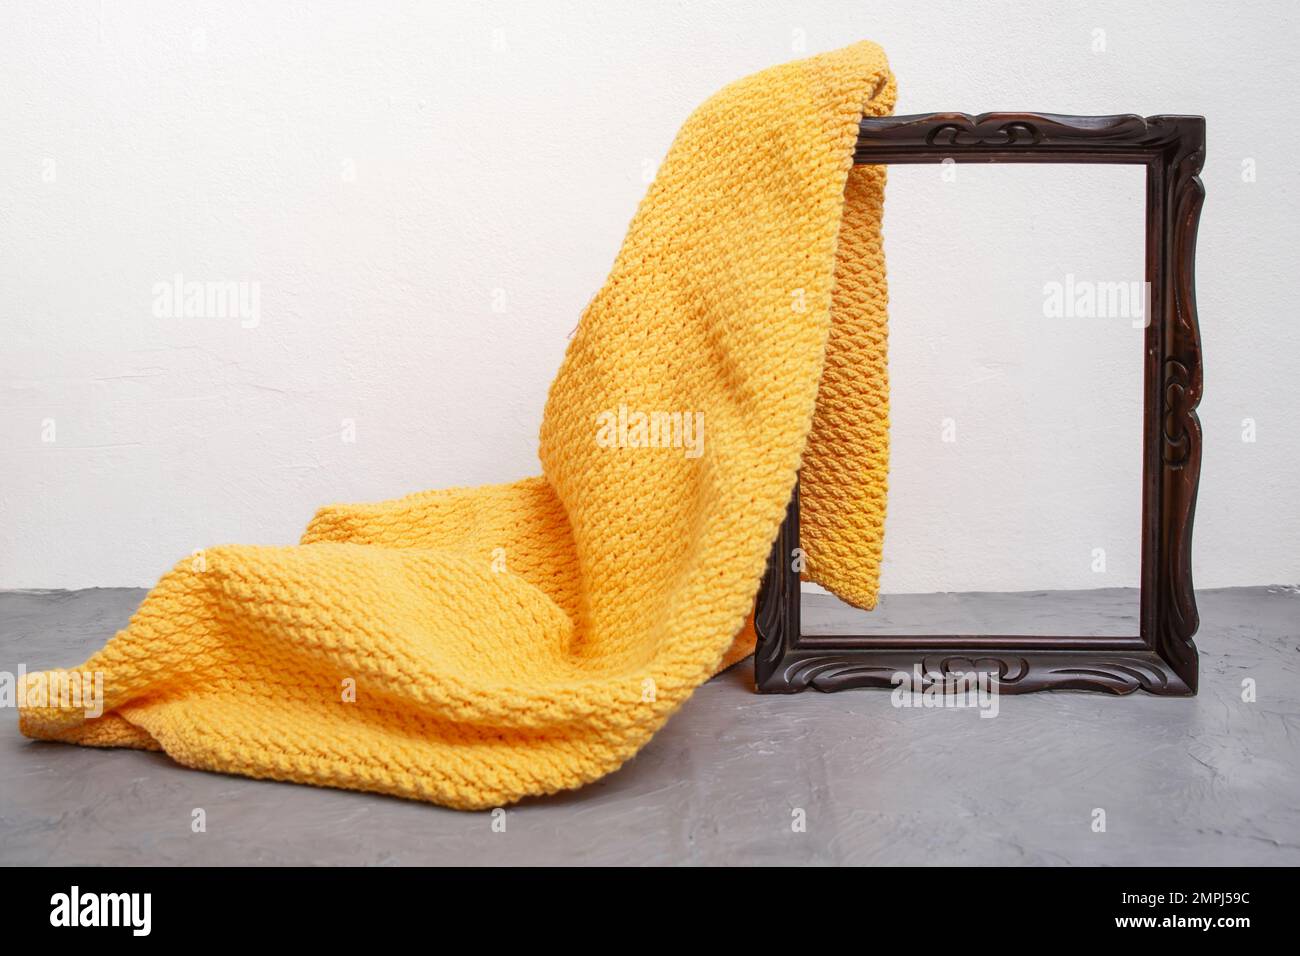 Orange crochet blanket unveiling a wooden frame on a gray cement countertop, product presentation display template Stock Photo